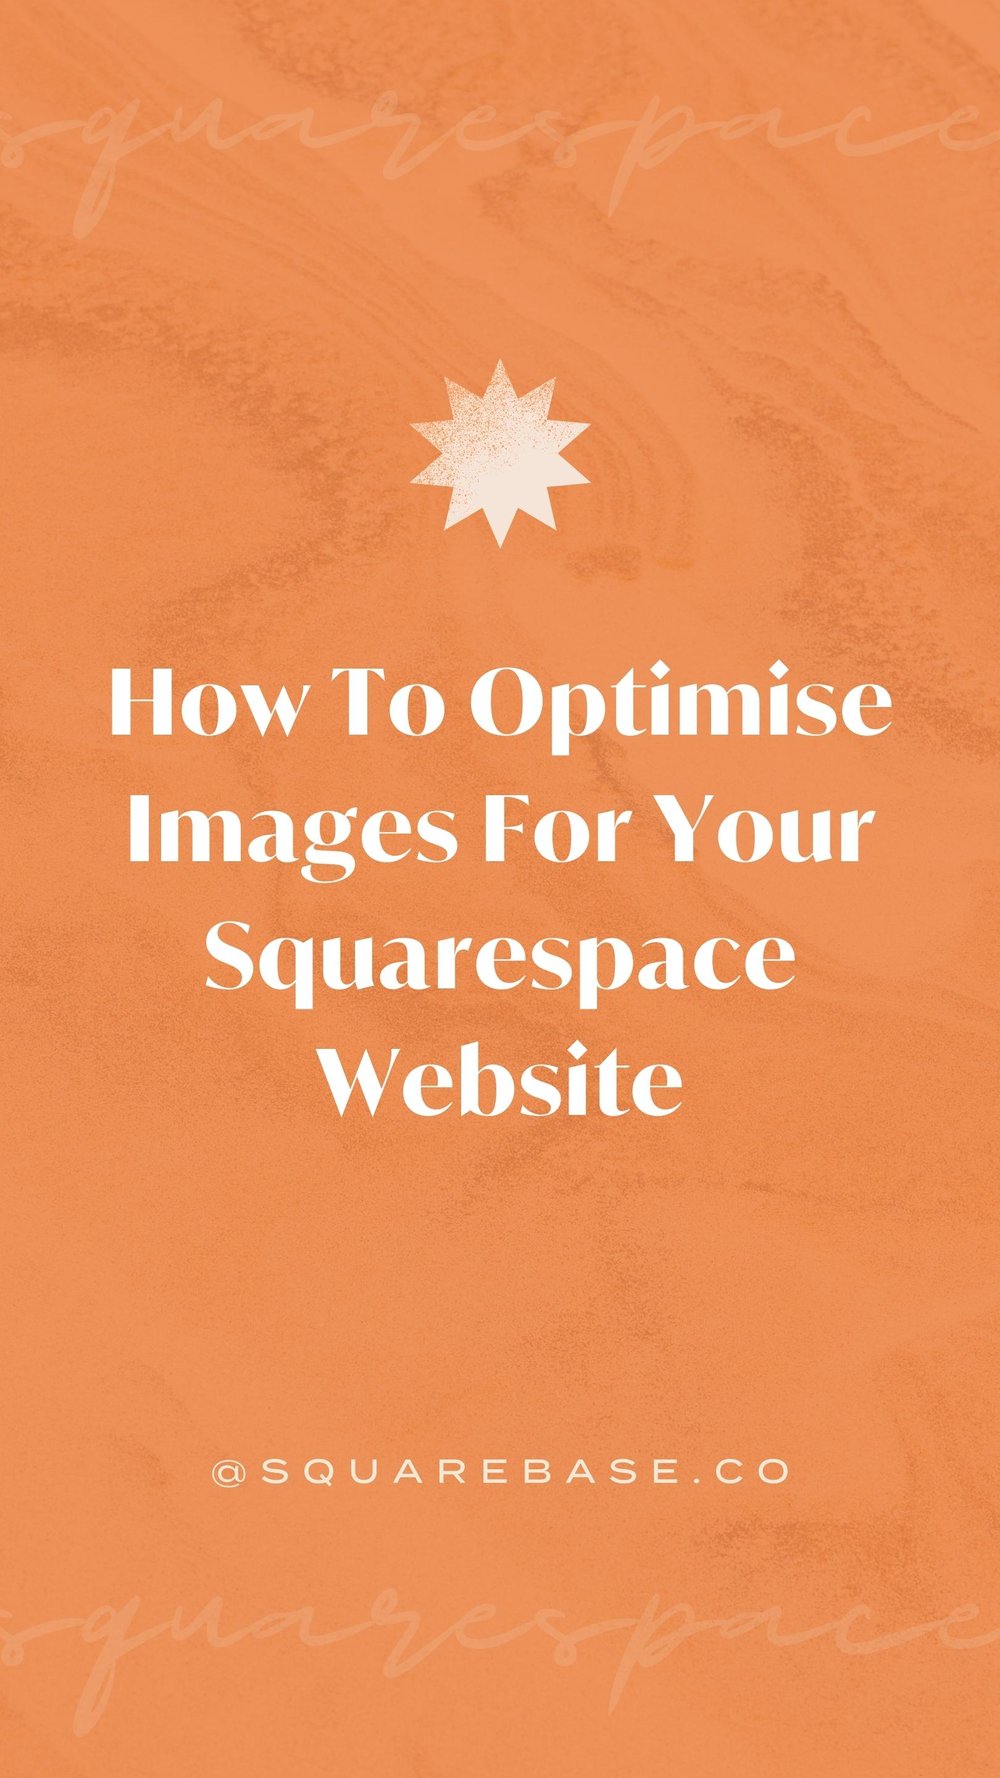 Optimising images for your Squarespace website | Website Templates ...